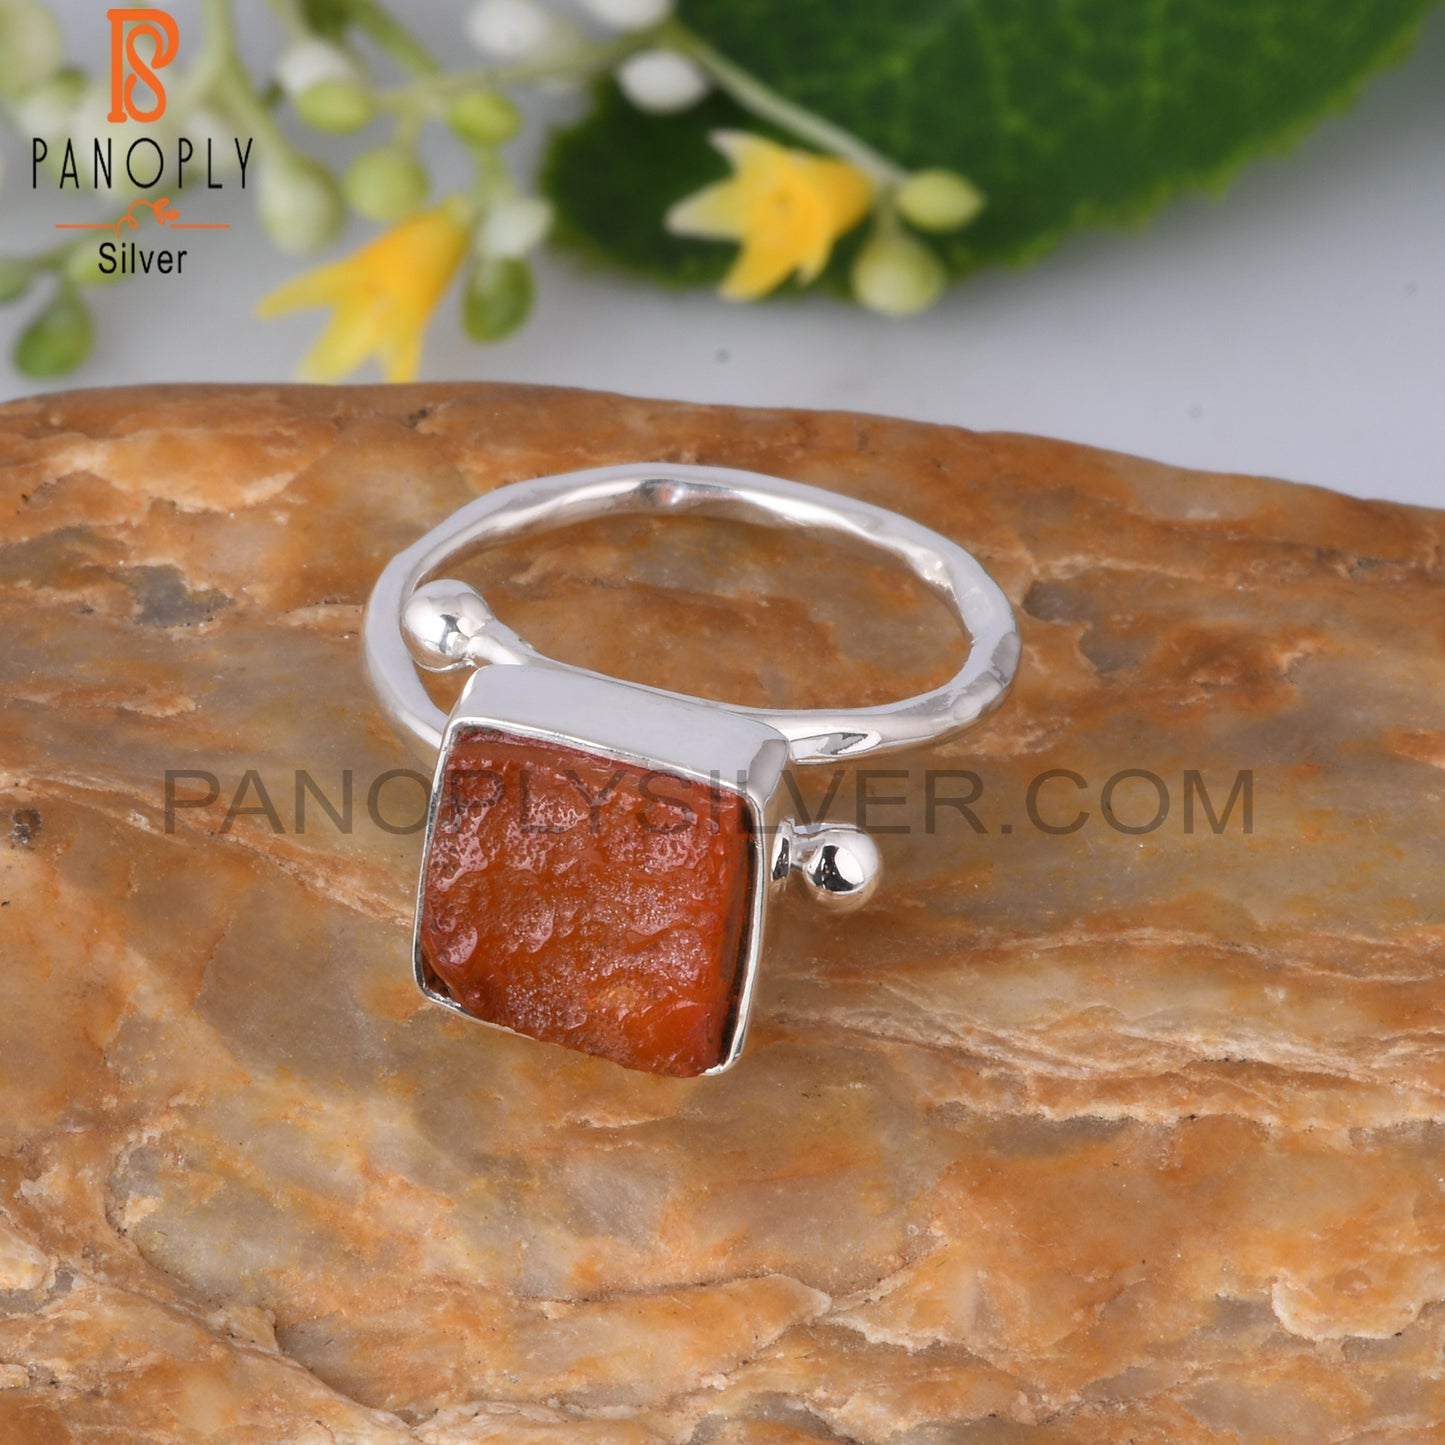 Carnelian Rough 925 Sterling Silver Adjustable Ring